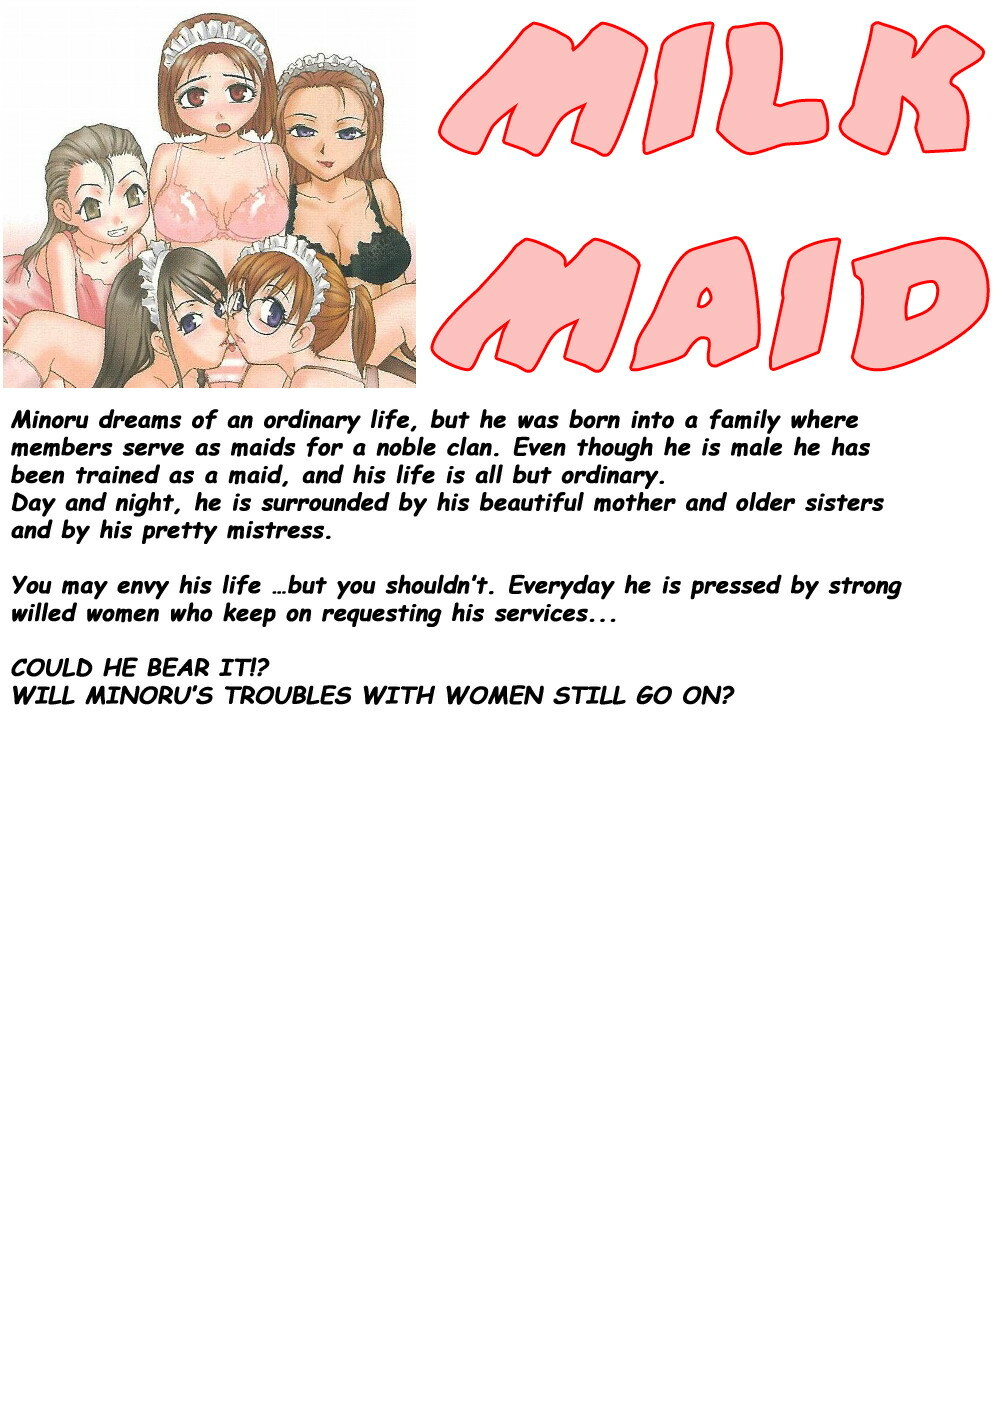 [RaTe] Milk Maid [English] [Stecaz] page 5 full